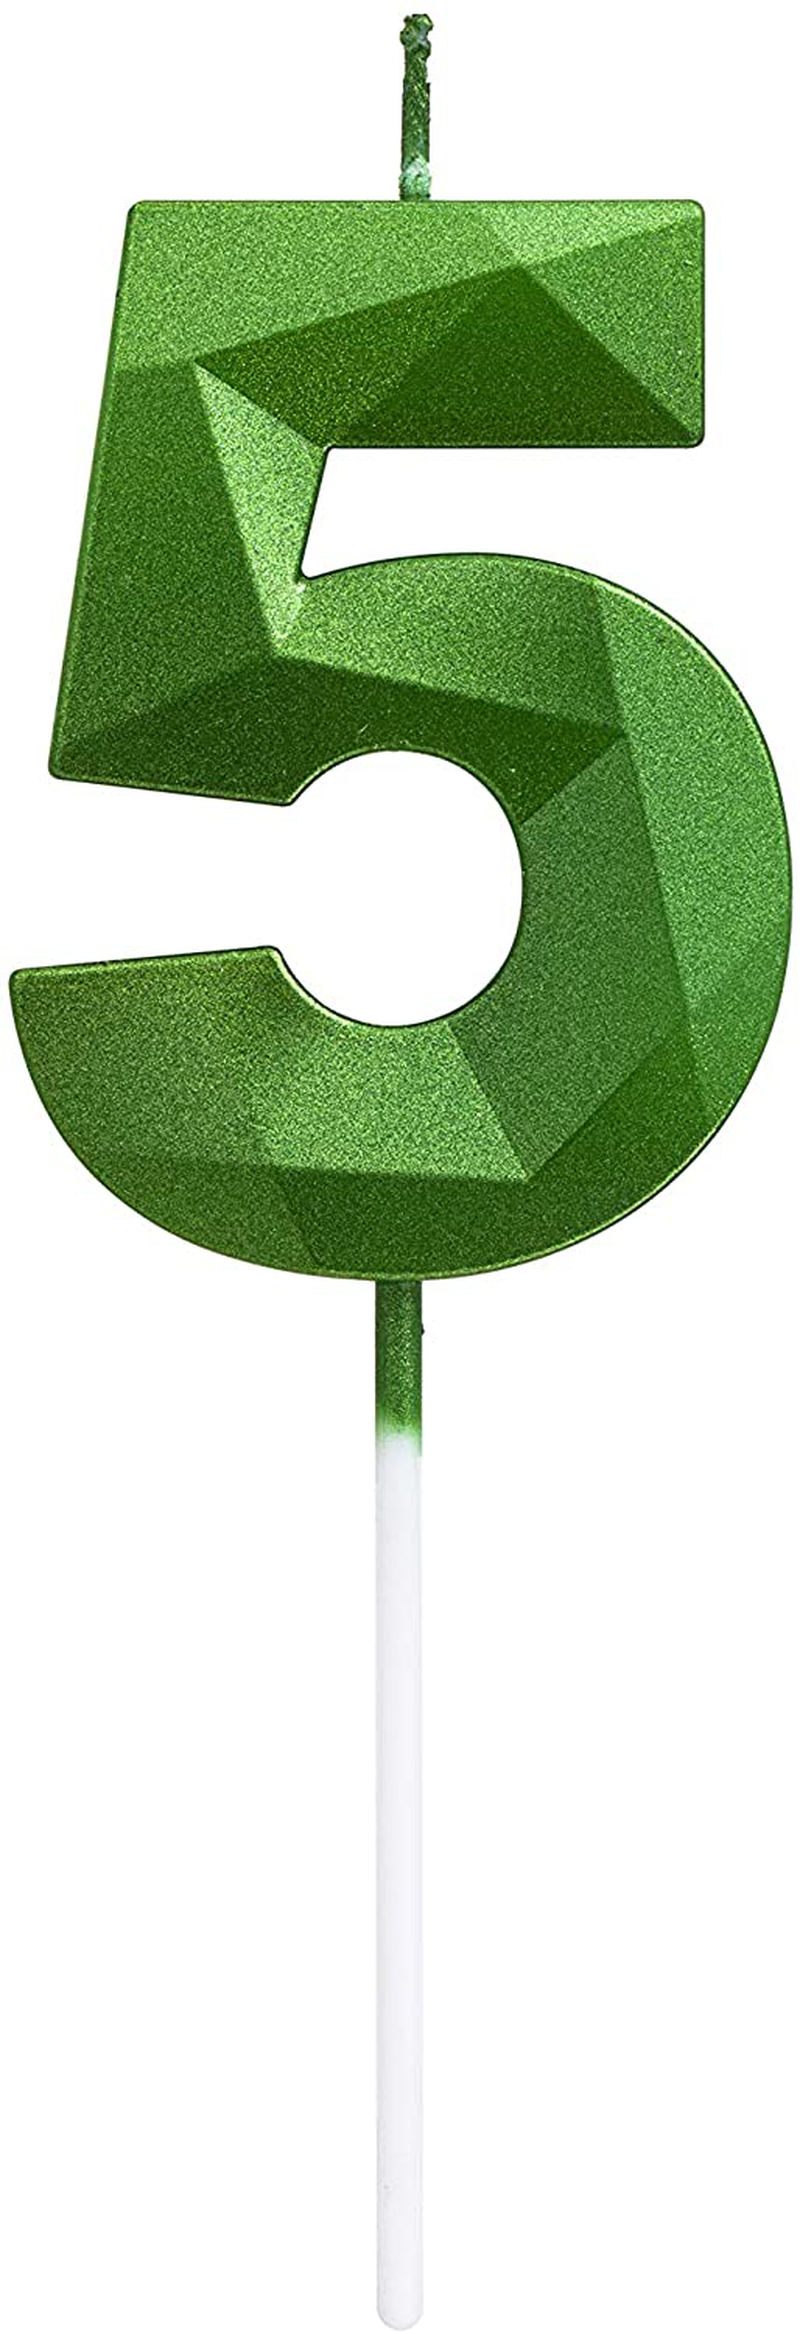 Green Happy Birthday Cake Candles,Wedding Cake Number Candles,3D Design Cake Topper Decoration for Party Kids Adults (Green Number 6) Home & Garden > Decor > Seasonal & Holiday Decorations& Garden > Decor > Seasonal & Holiday Decorations MEIMEI Green number 5 